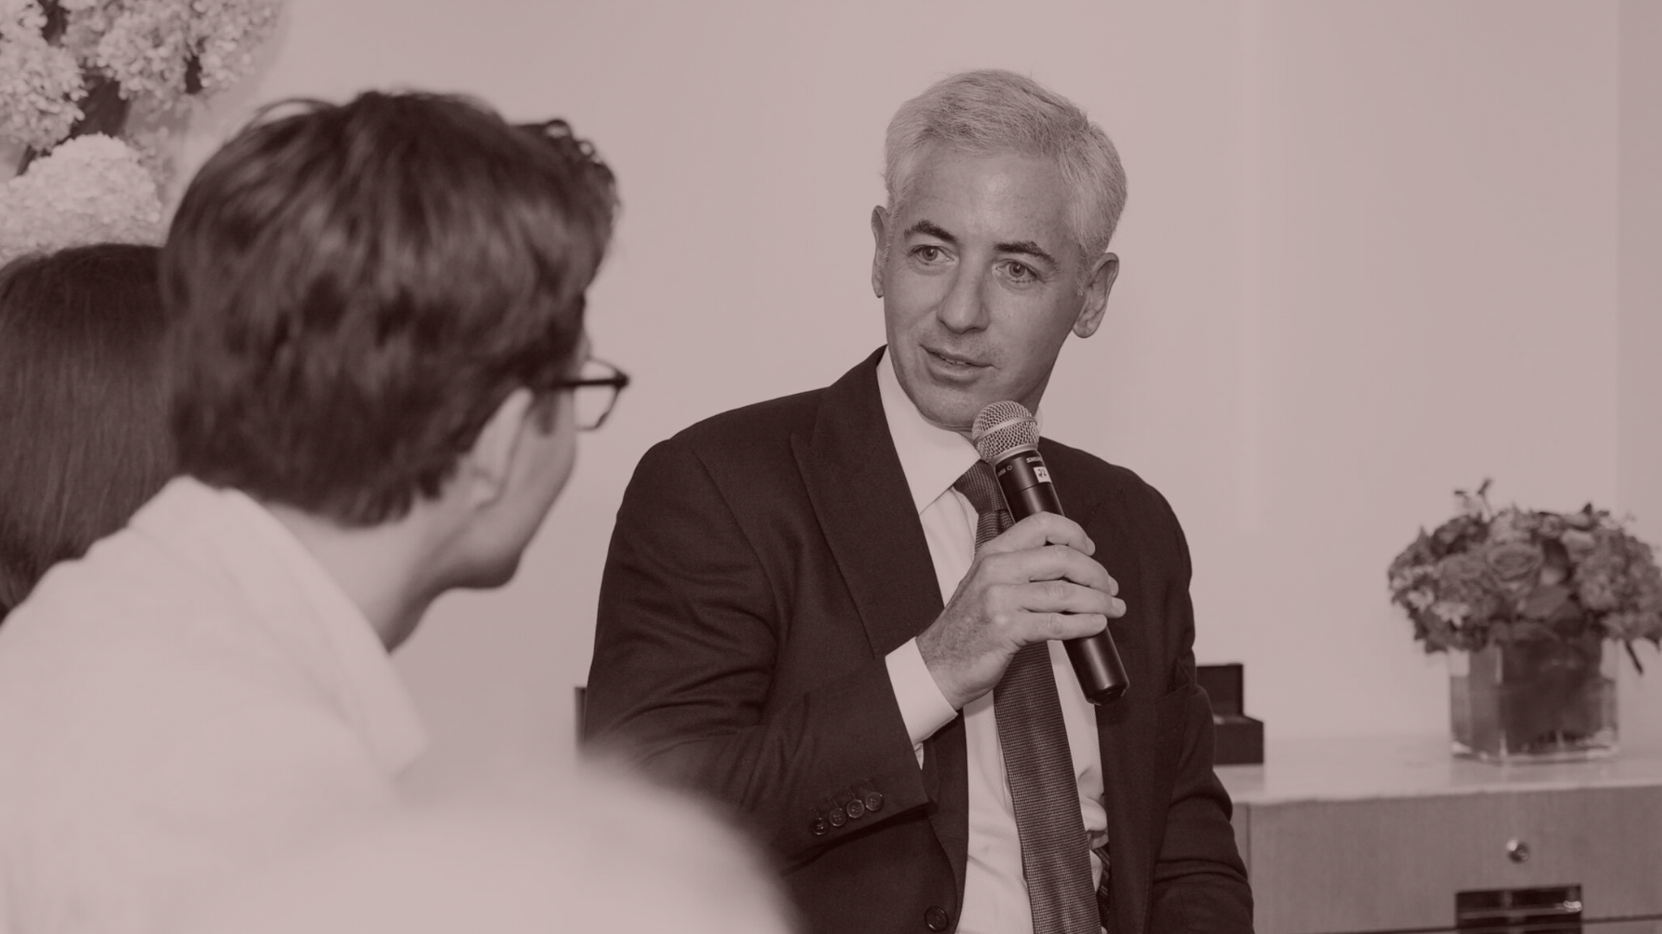 The Measure of Ackman